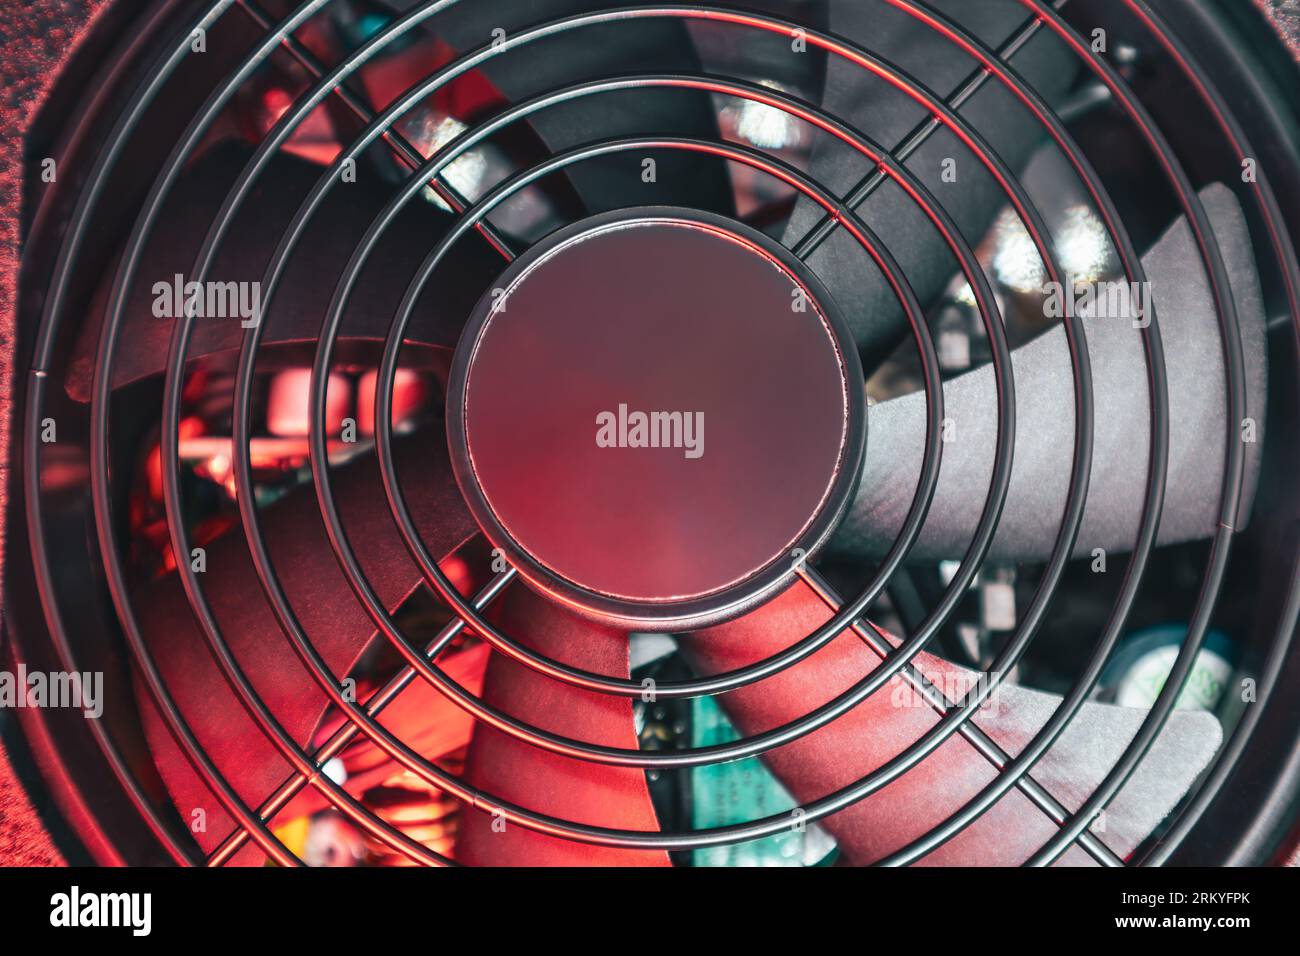 Black cooler fan with metal mesh, PC hardware details. Desktop PC CPU unit cooling radiator close-up in red light. Components from powerful modern per Stock Photo